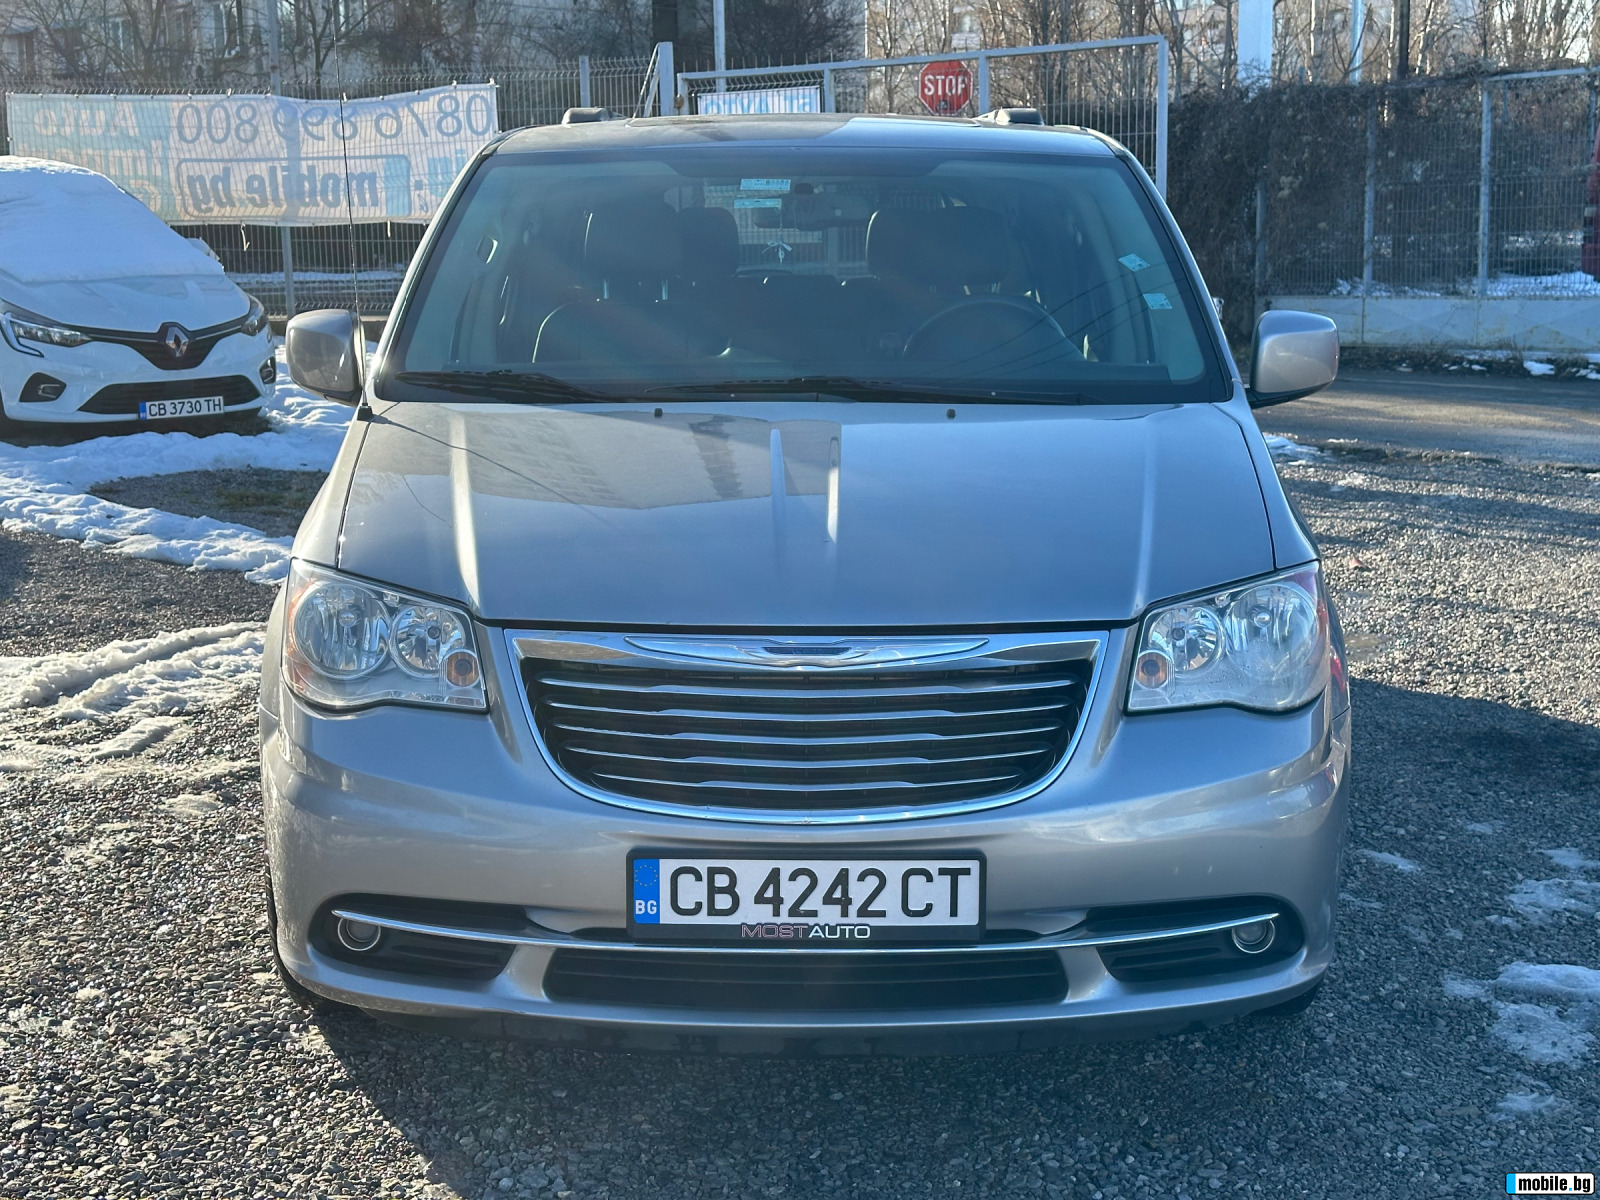 Chrysler Town and Country 3.6i **LIMITED** | Mobile.bg   3